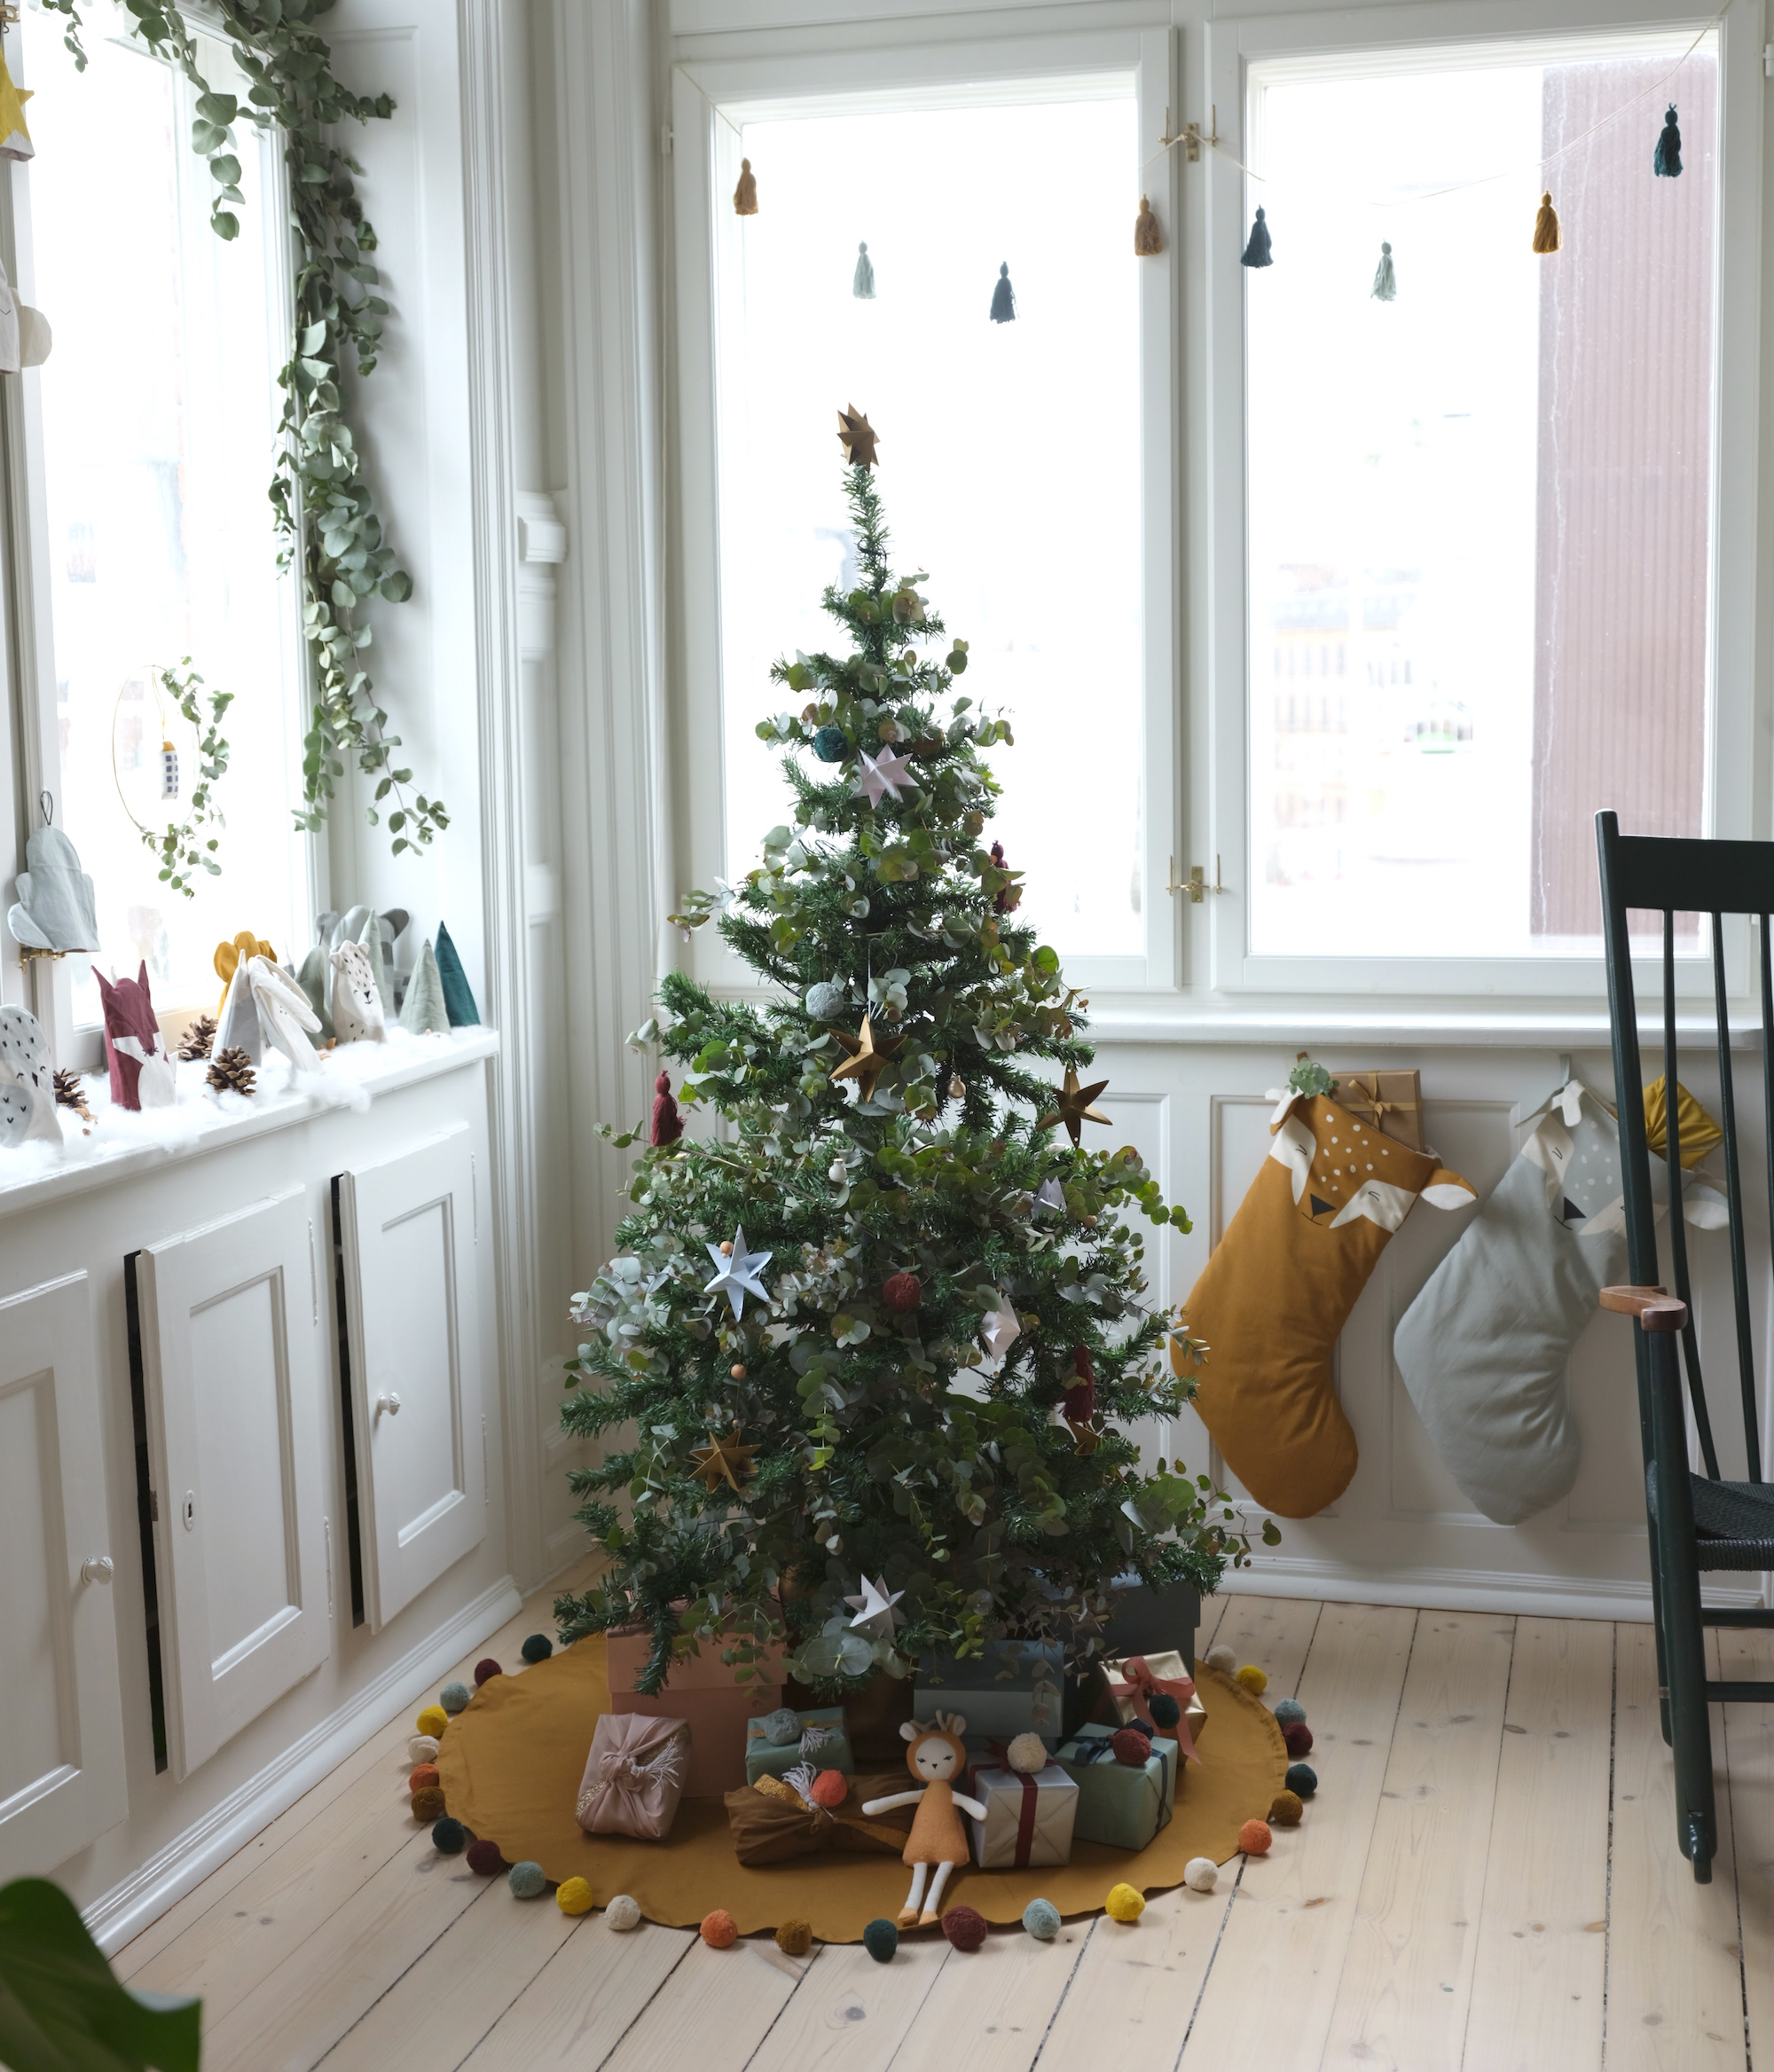 How To Create A Scandi Christmas Theme At Home - Nordic Style